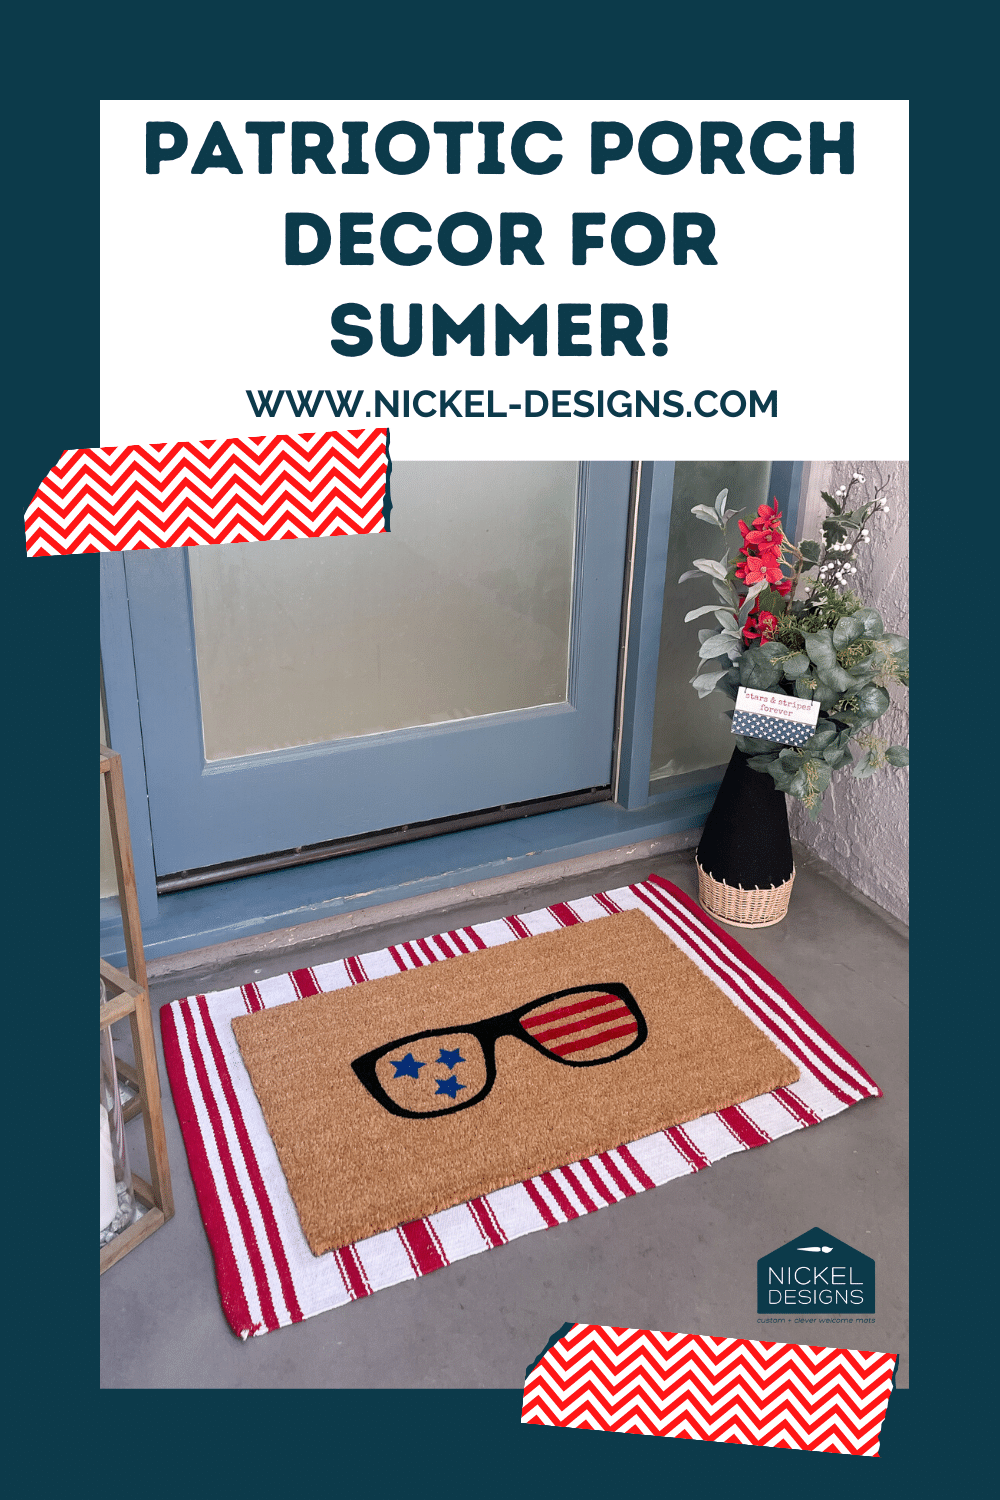 Ready for a summer porch update? Our Patriotic Porch Collection is live!